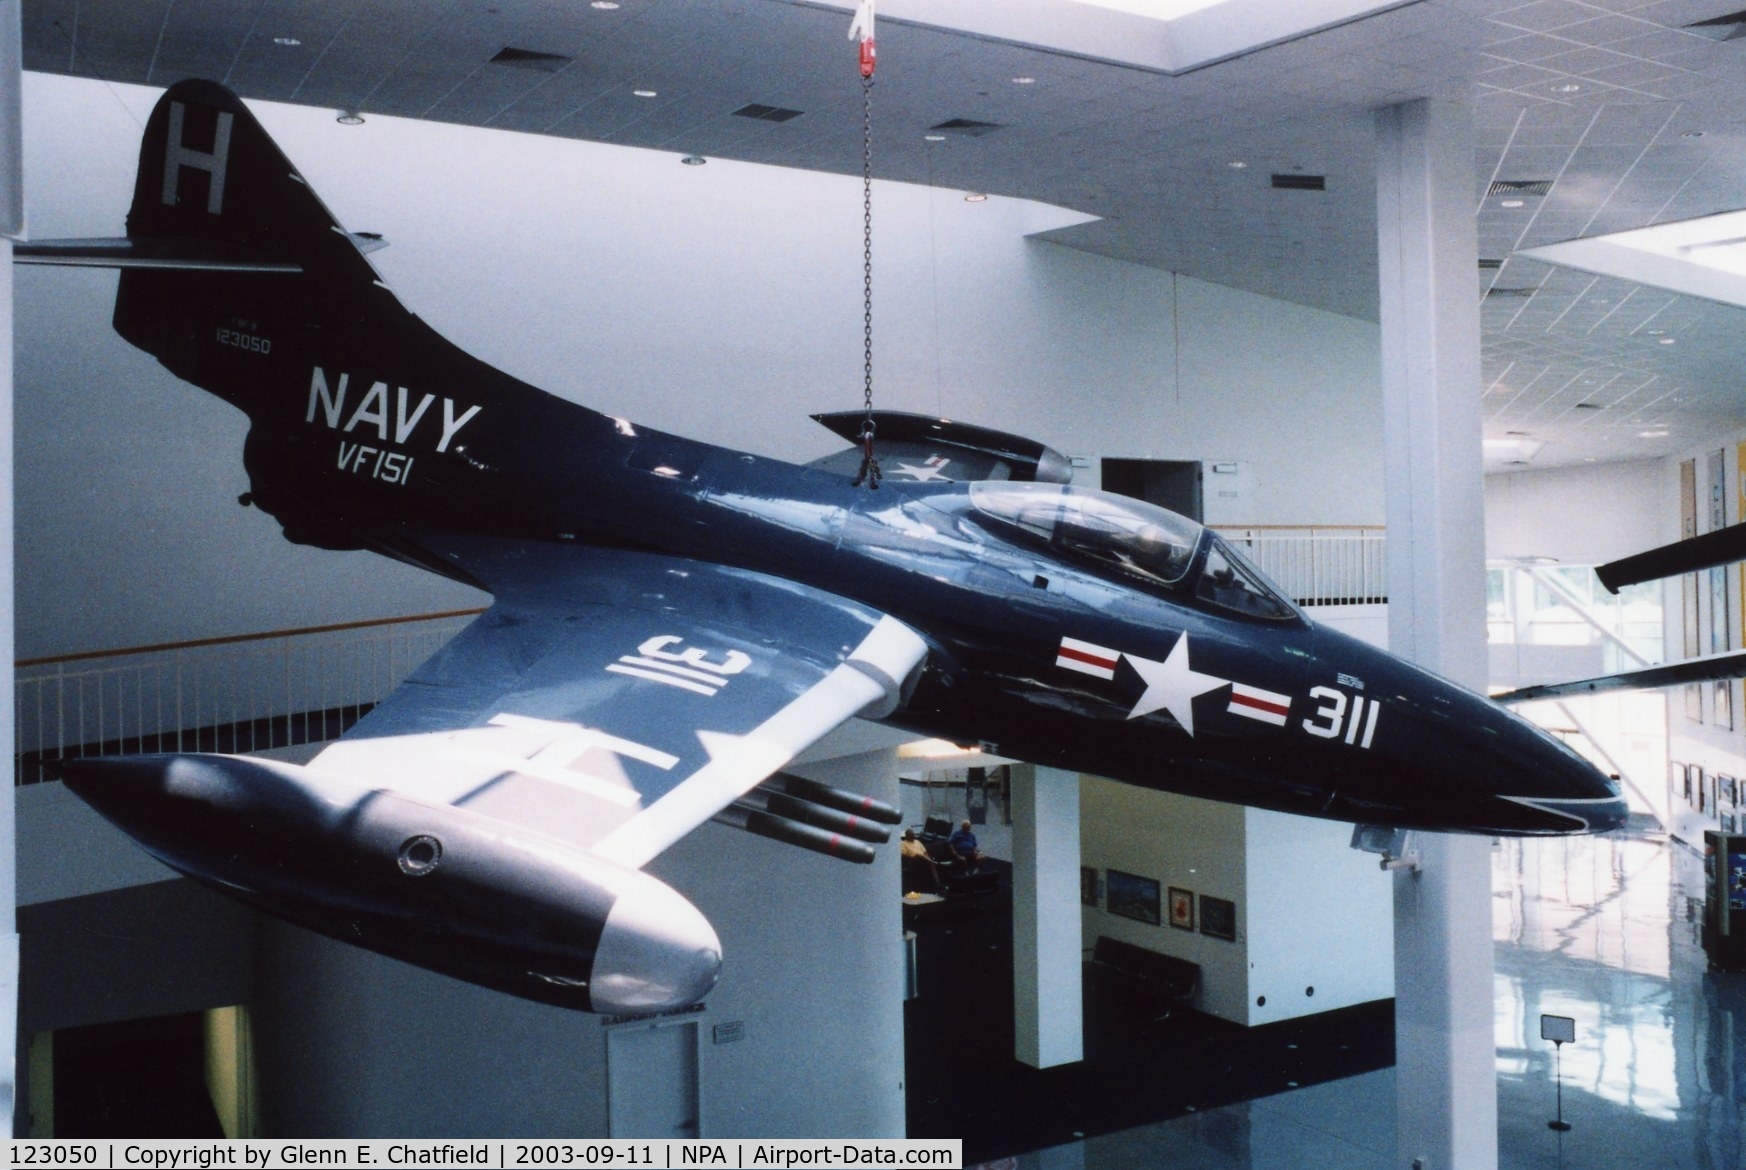 123050, Grumman F9F-2 Panther C/N K-65, F9F-2/F-9B at the National Museum of Naval Aviation